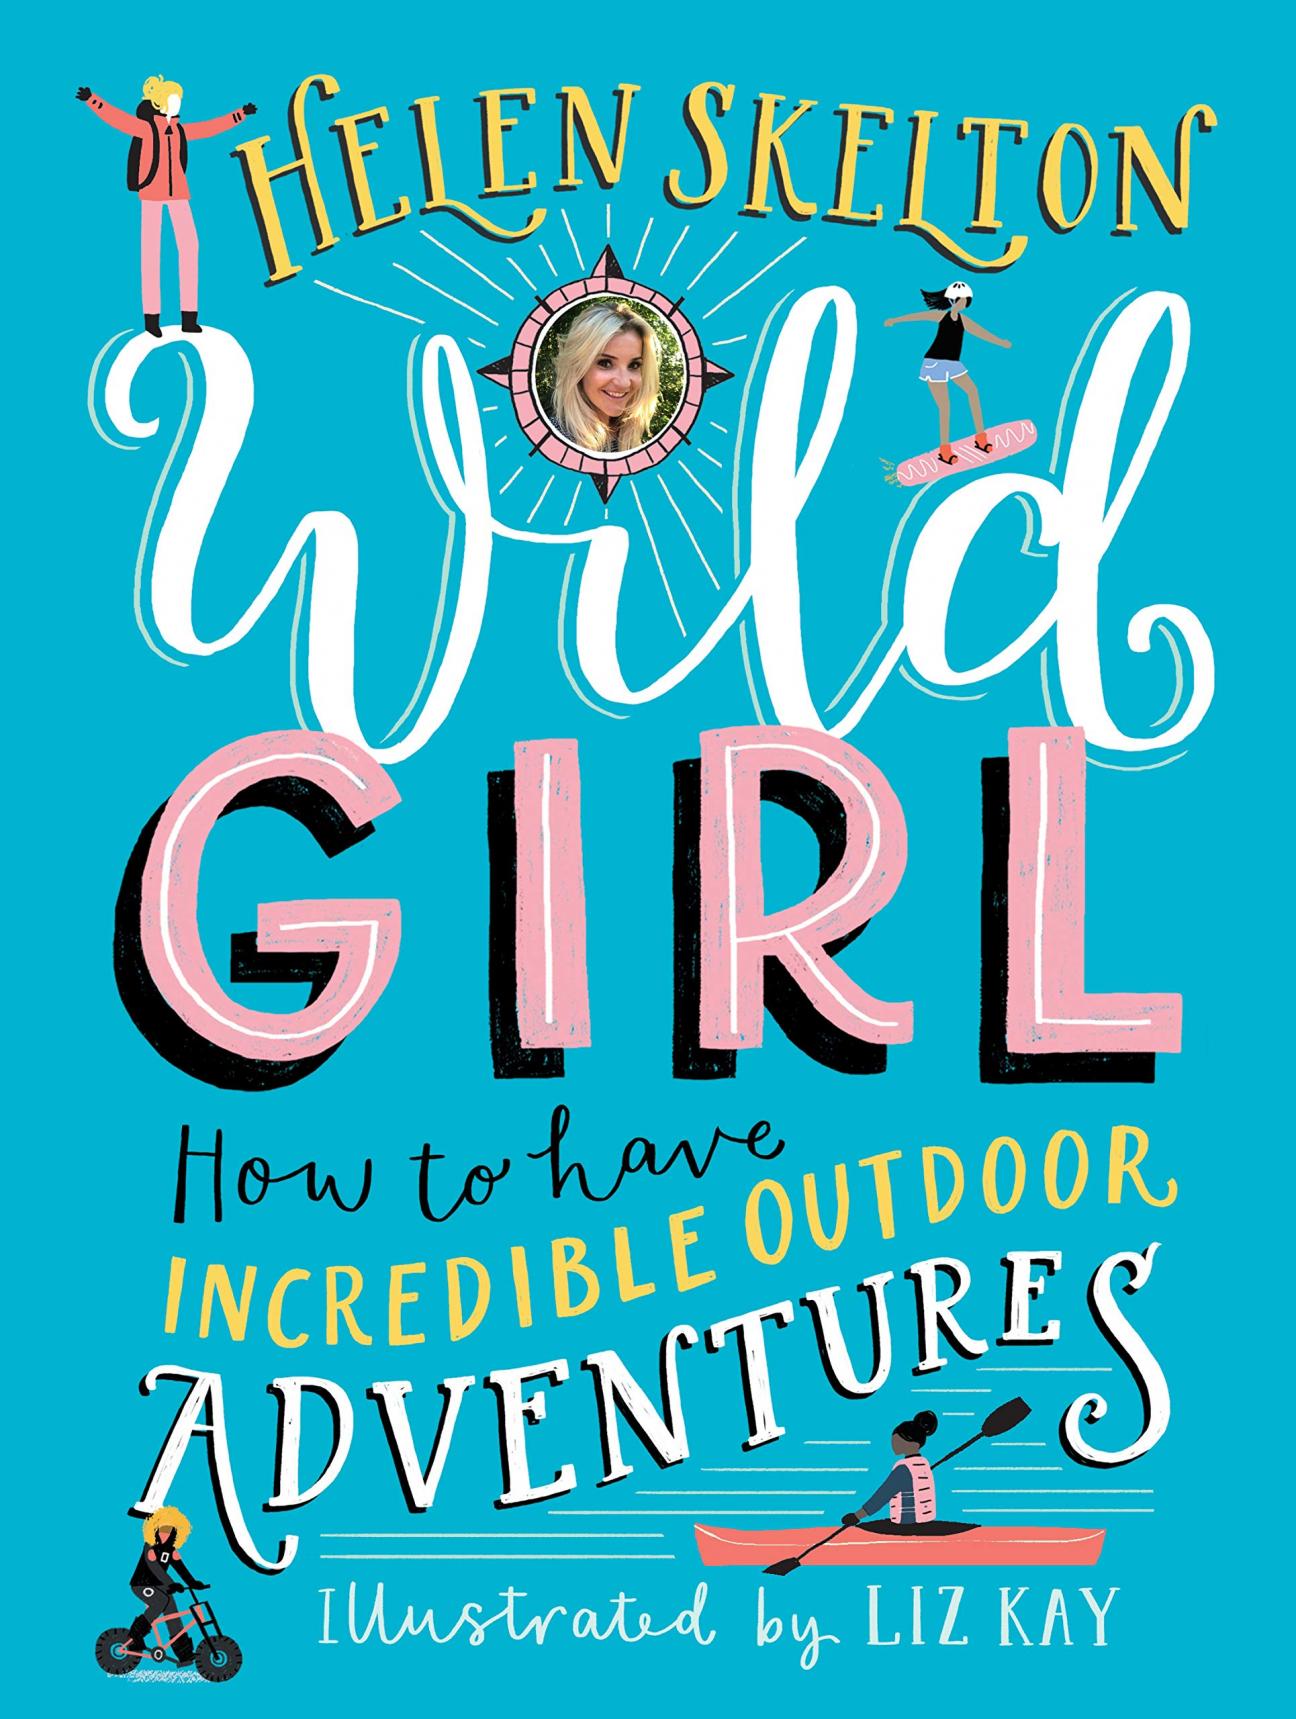 The cover of "Wild Girl" by Helen Skelton which has a teal background and the title in white, yellow in pink whimsical fonts surrounded by drawings of girls doing various outdoor activities. 